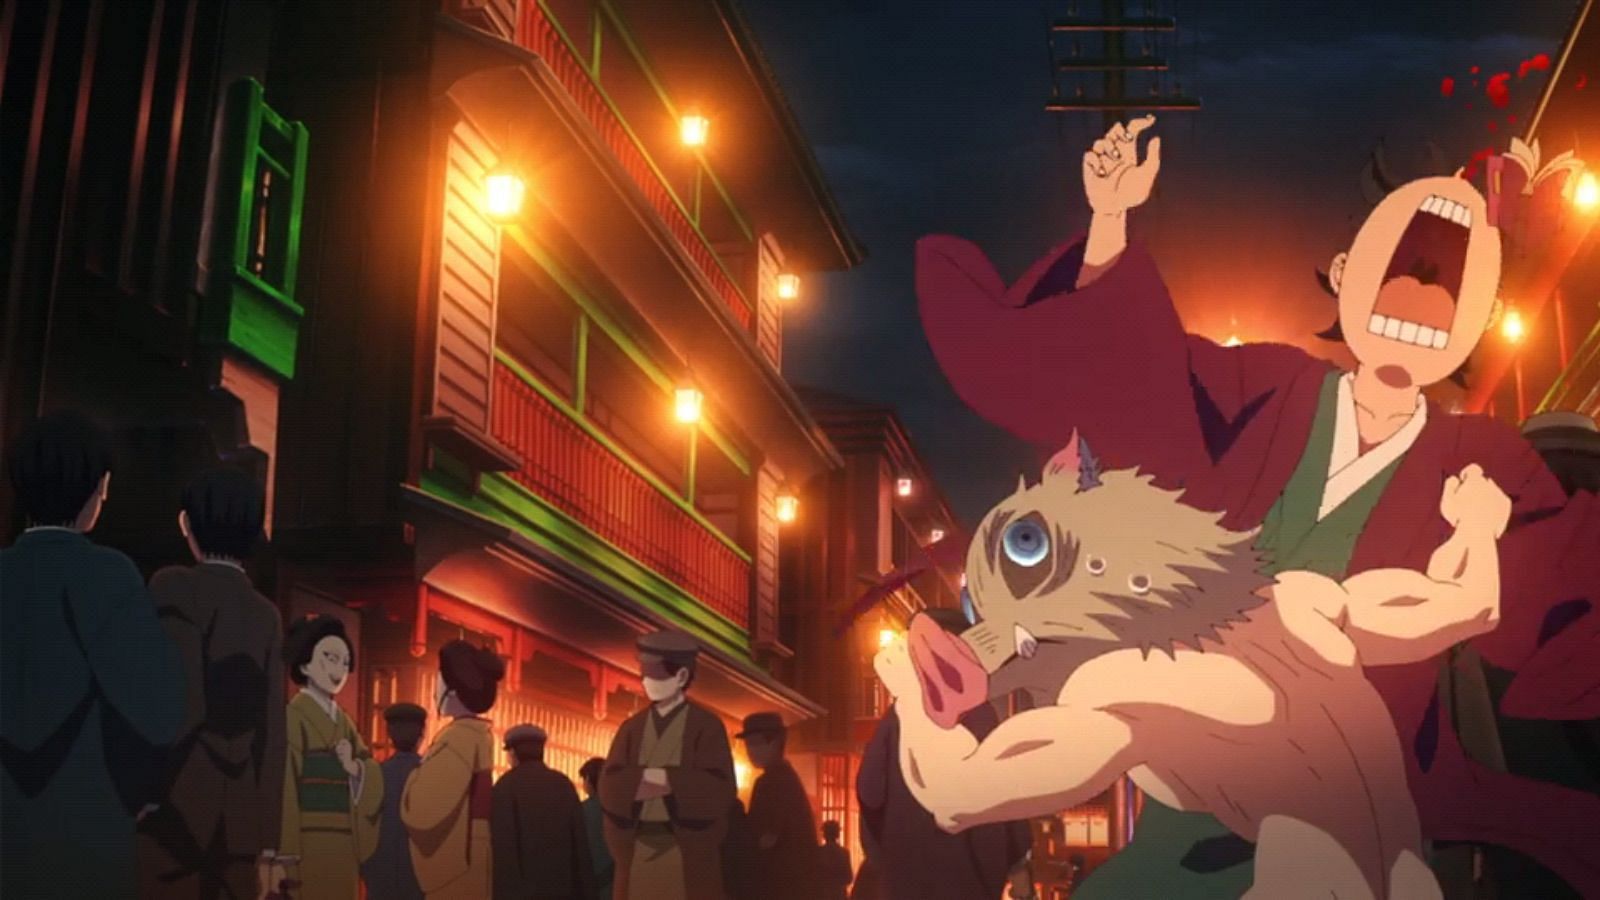 Inosuke knocks out an Entertainment District citizen, not noticing or caring (Image via Funimation)